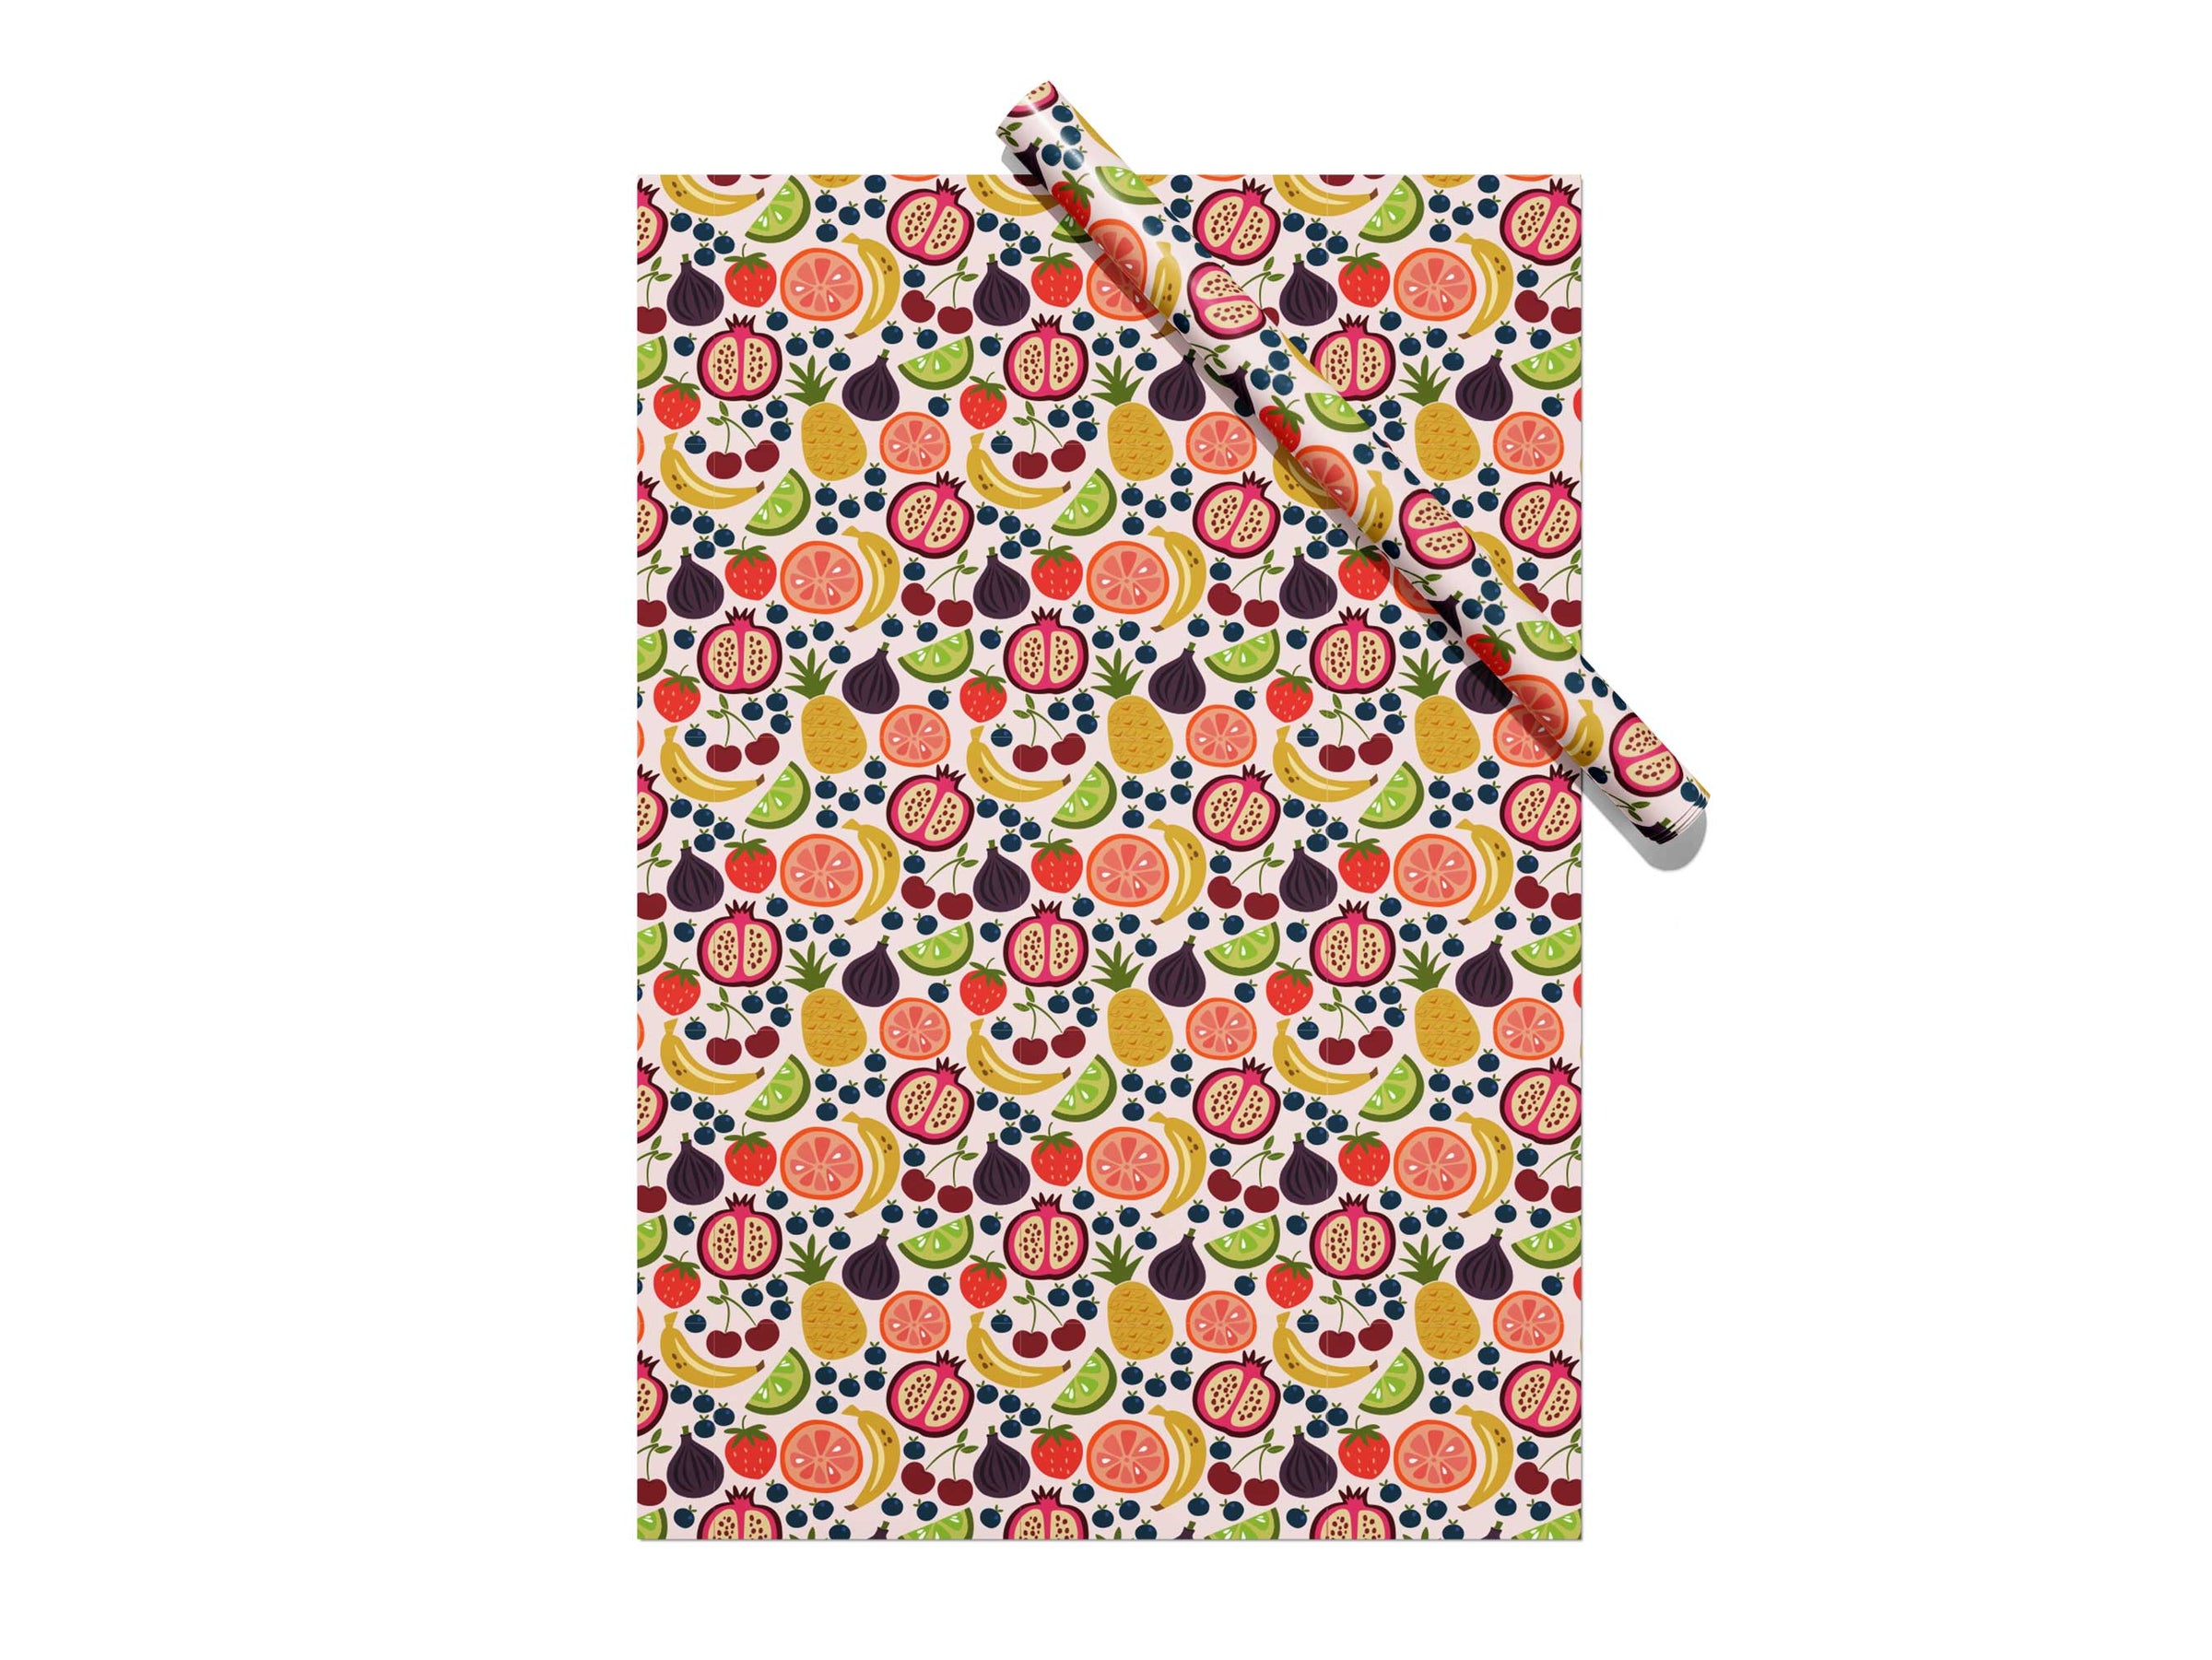 Fruit wrapping paper featuring a colorful mixed fruit pattern design for Gigglemugg